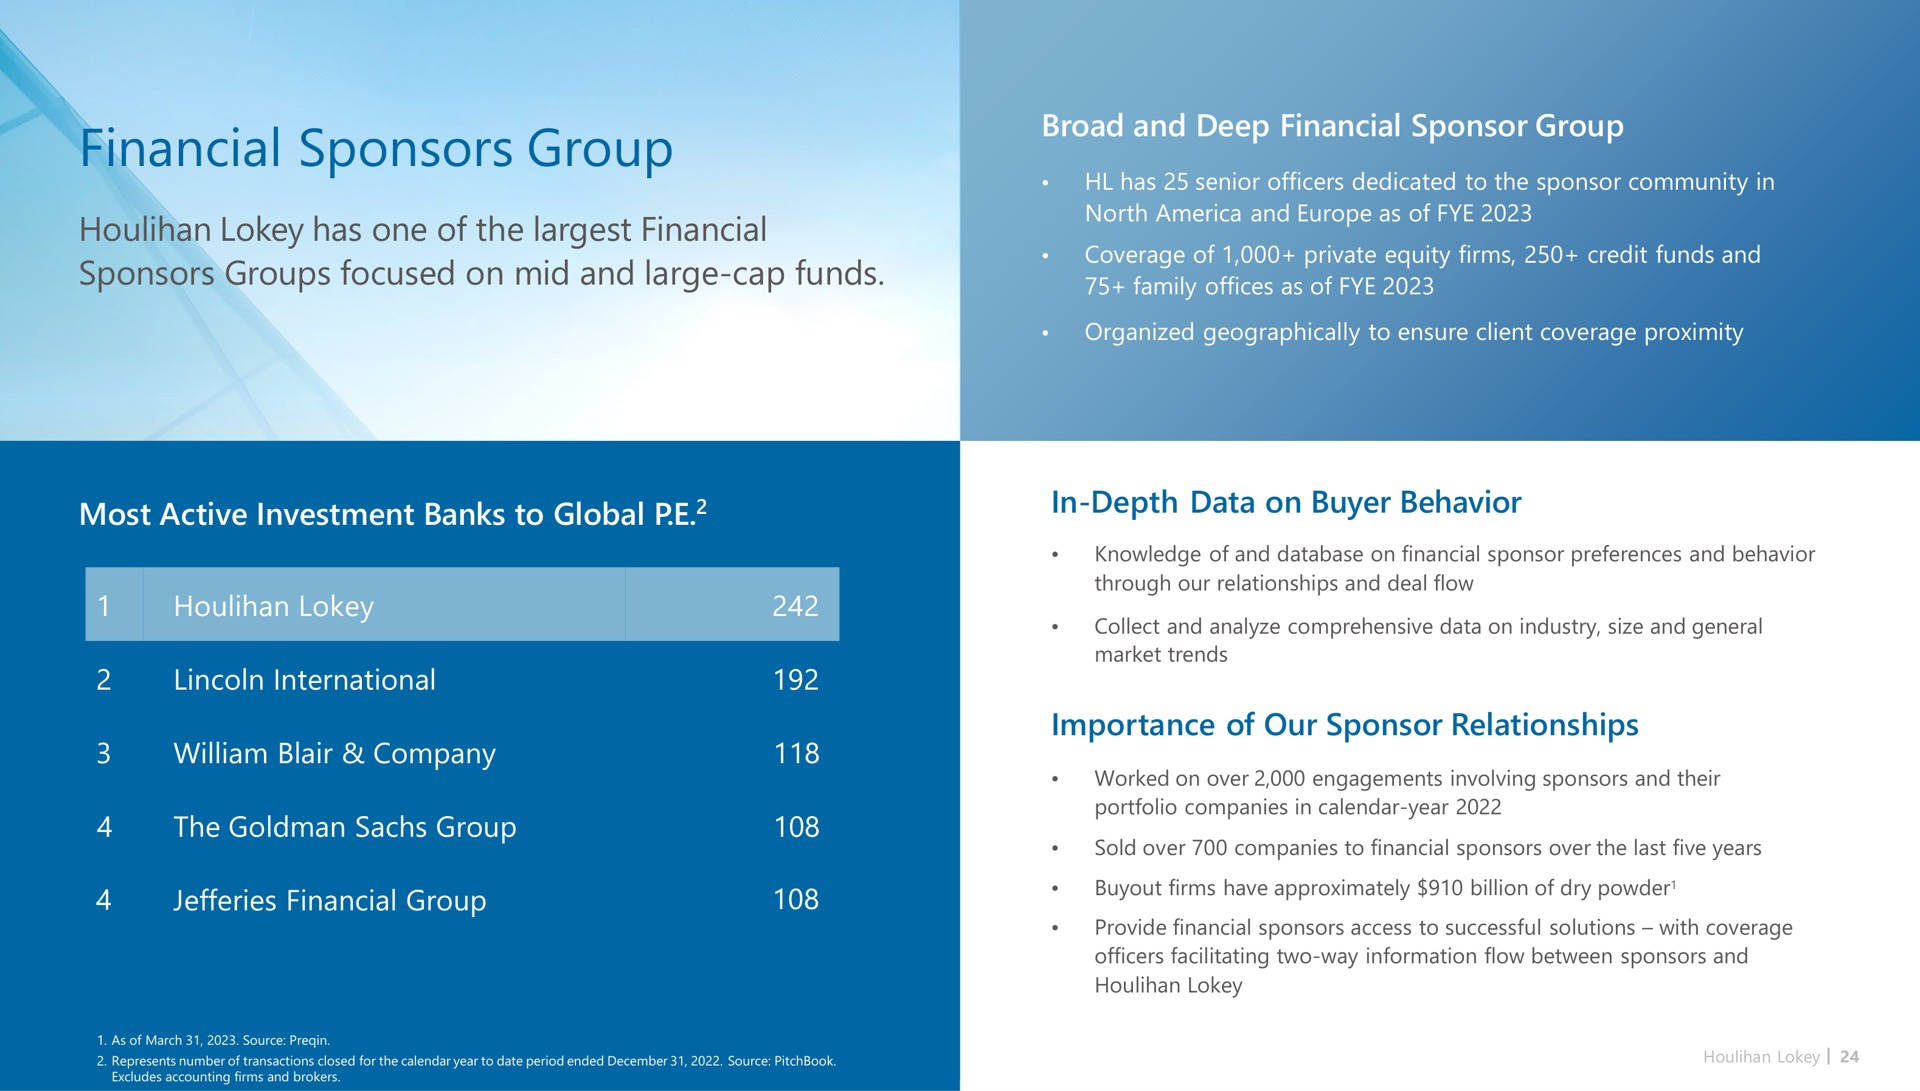 financial sponsors group has one of the financial sponsors groups focused on mid and large cap funds north eye be | Houlihan Lokey